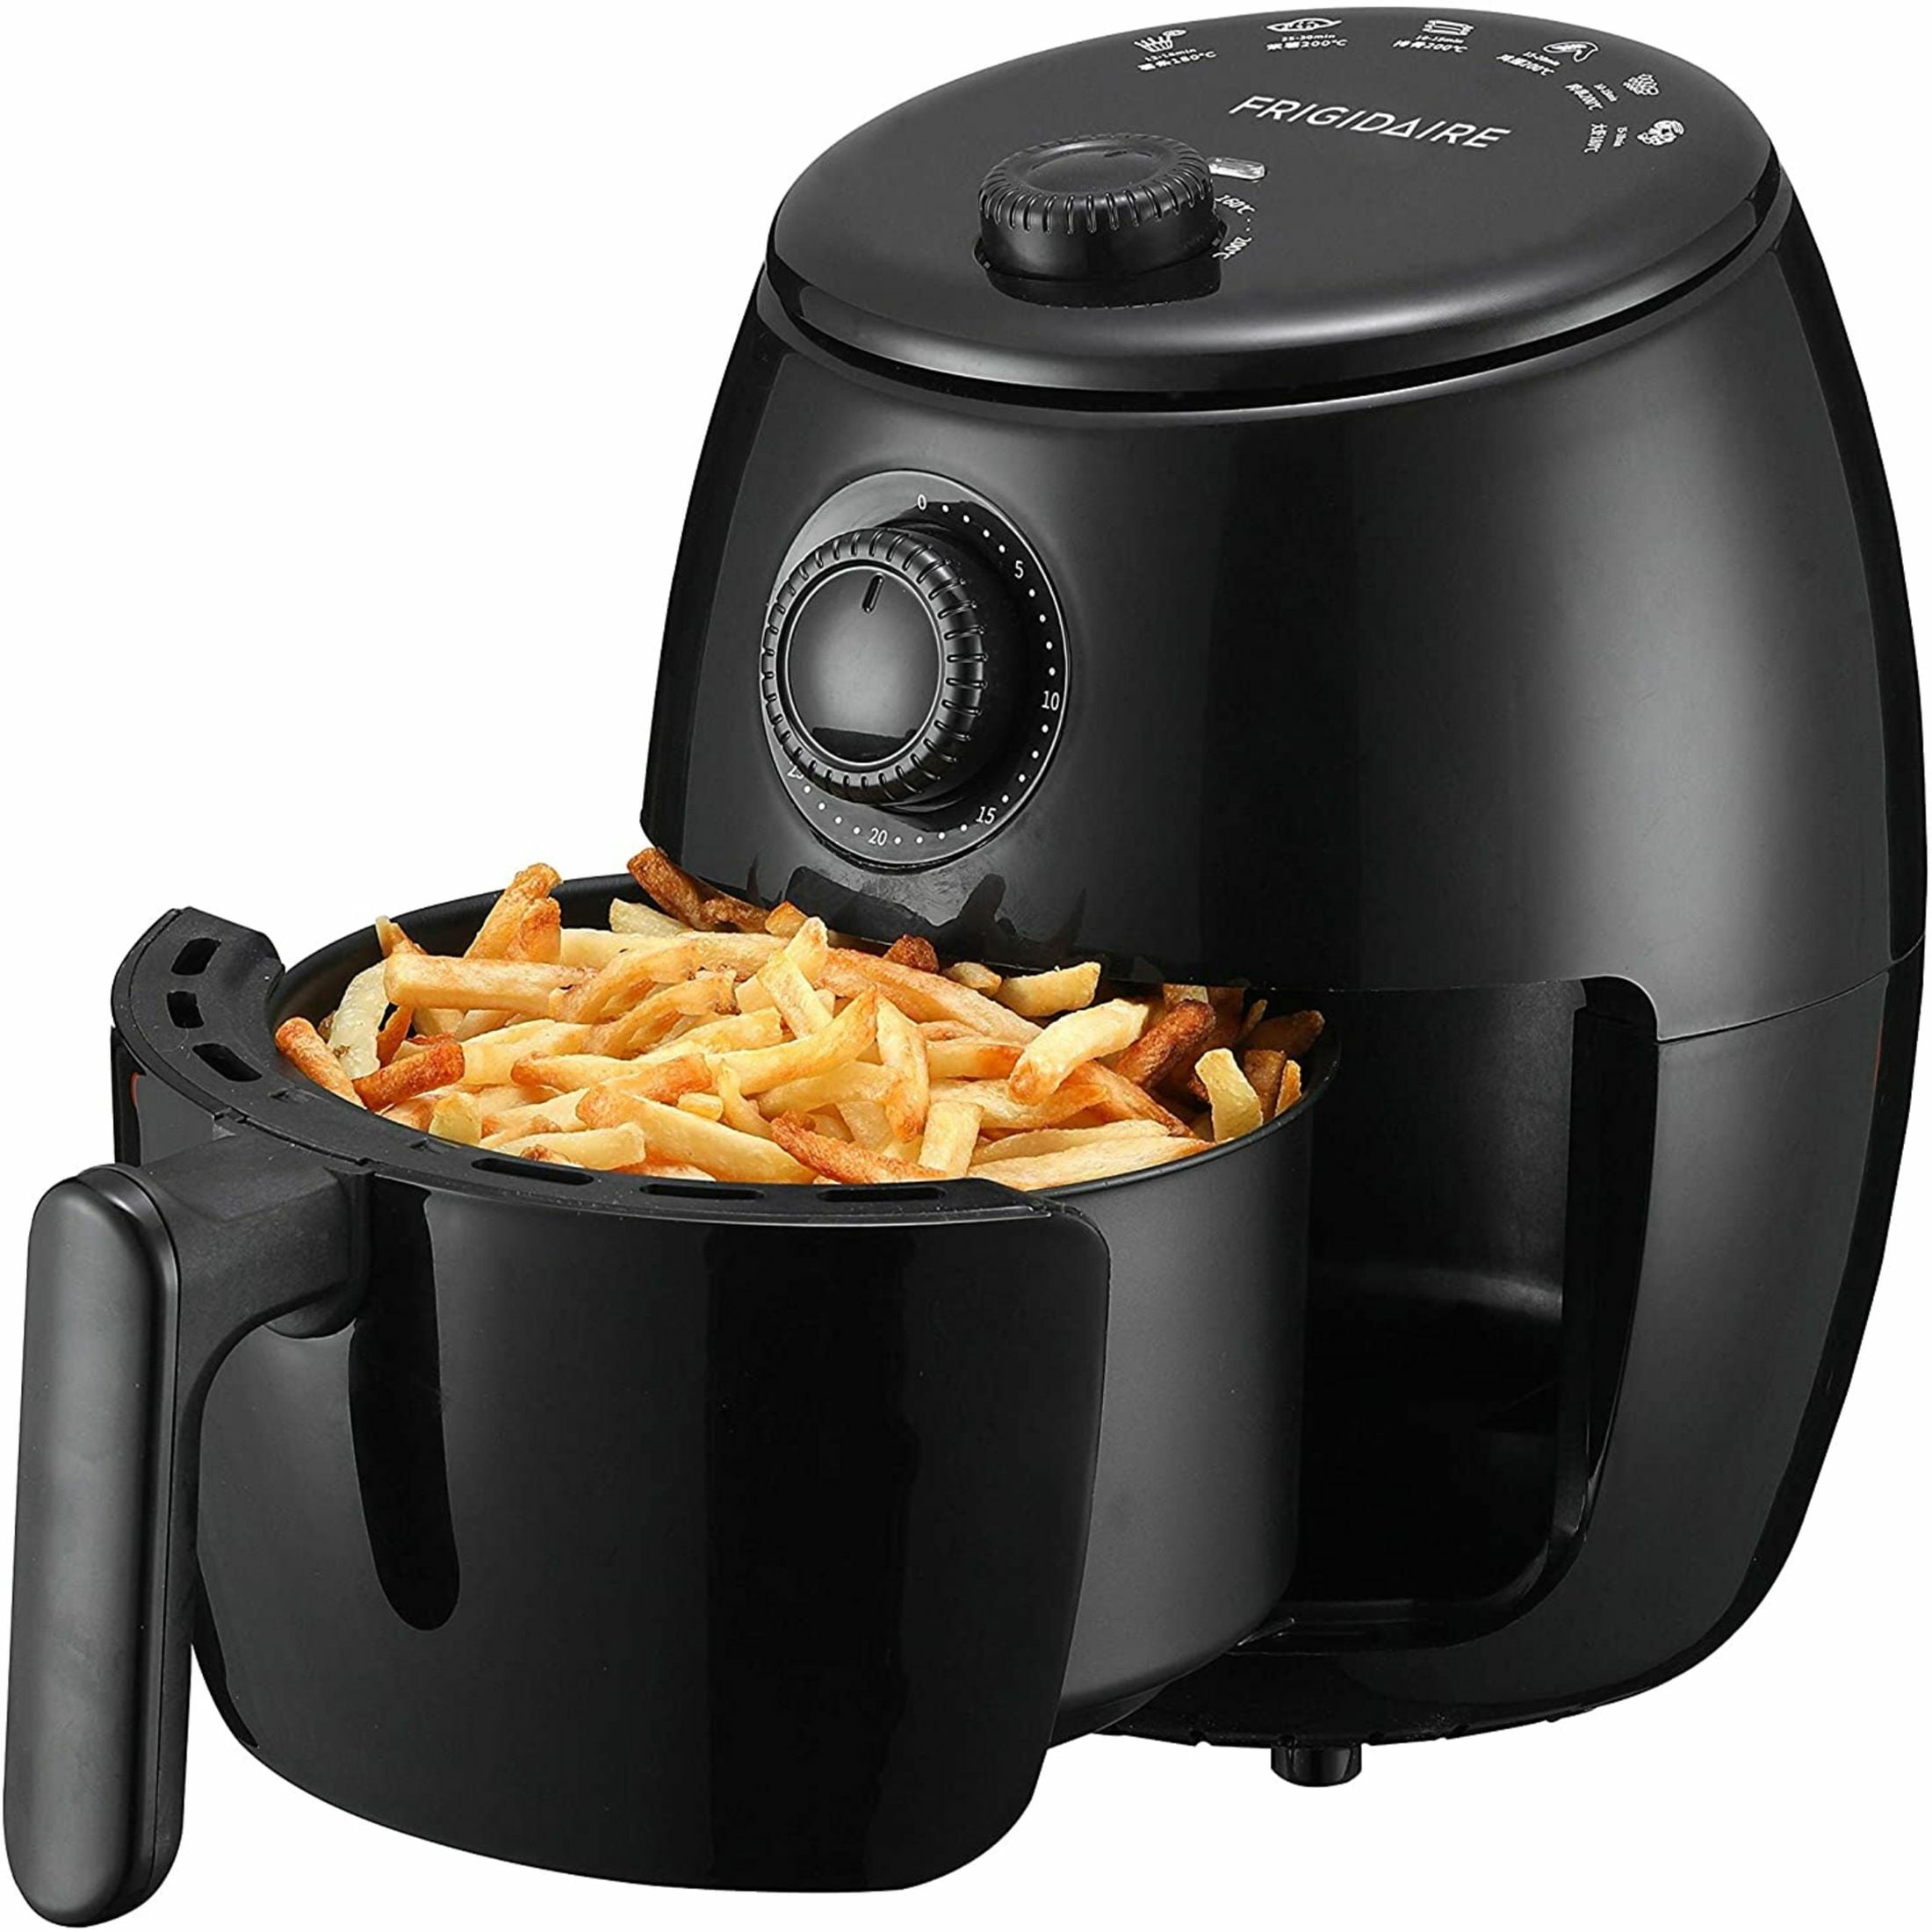 Frigidaire Digital Air Fryer Stainless Steel With Viewing Window 8.5 Quart  8 L